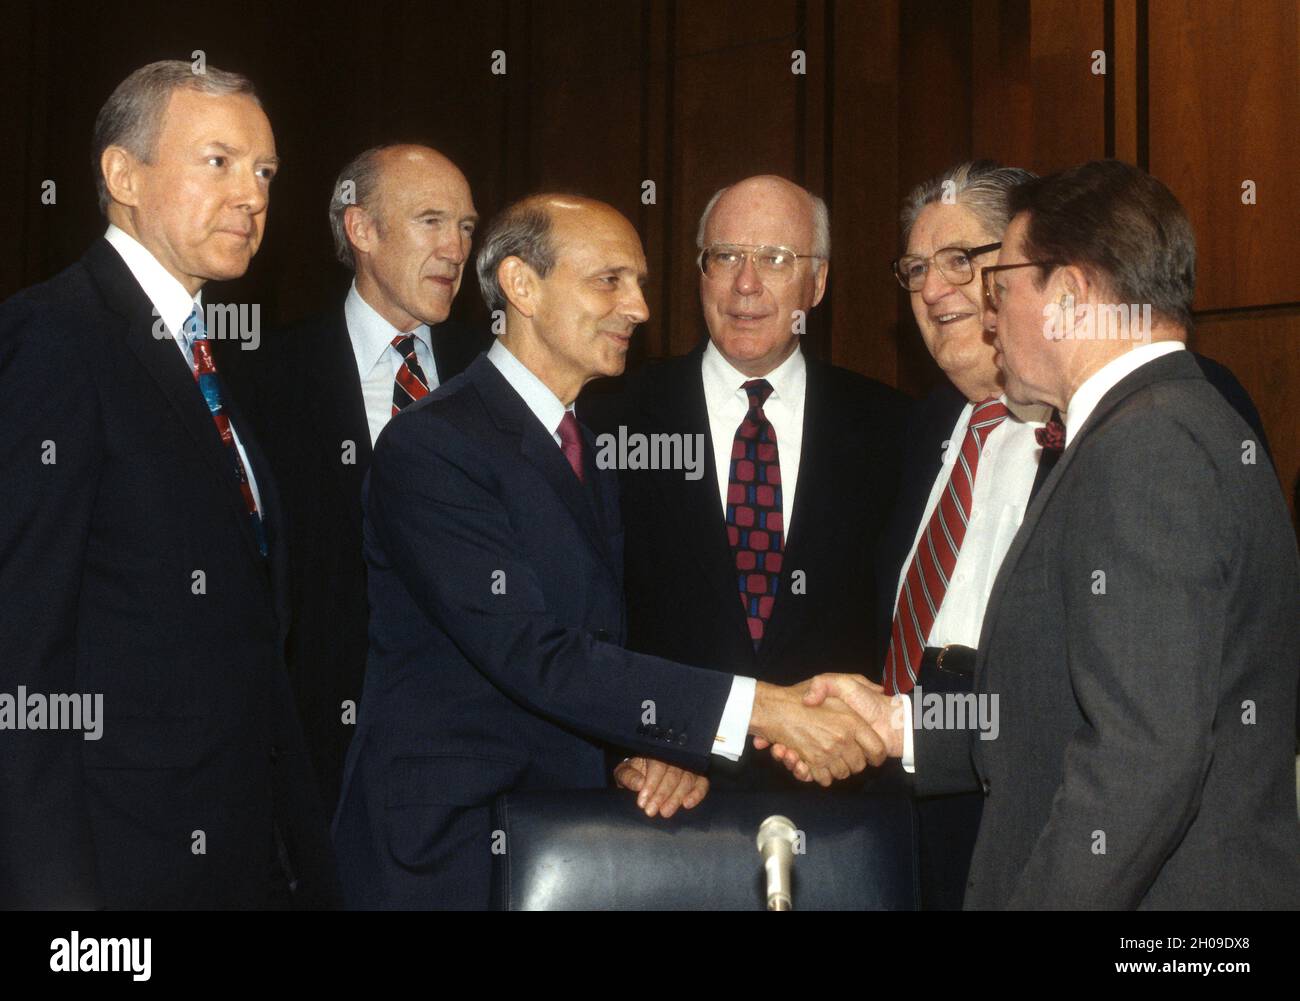 United States Senator Paul Simon (Democrat of Illinois), right, welcomes Chief Judge of the US Court of Appeals for the First Circuit, Stephen G. Breyer, US President Bill Clinton’s nominee to replace the retiring Justice Harry Blackmun as Associate Justice of the US Supreme Court, third left, to his confirmation hearing on Capitol Hill in Washington, DC on July 12, 1994.  From left to right; US Senator Orrin Hatch (Republican of Utah), US Senator Alan Simpson (Republican of Wyoming), Judge Breyer, United States Senator Patrick Leahy (Democrat of Vermont), US Senator Howell Heflin (Democrat of Stock Photo